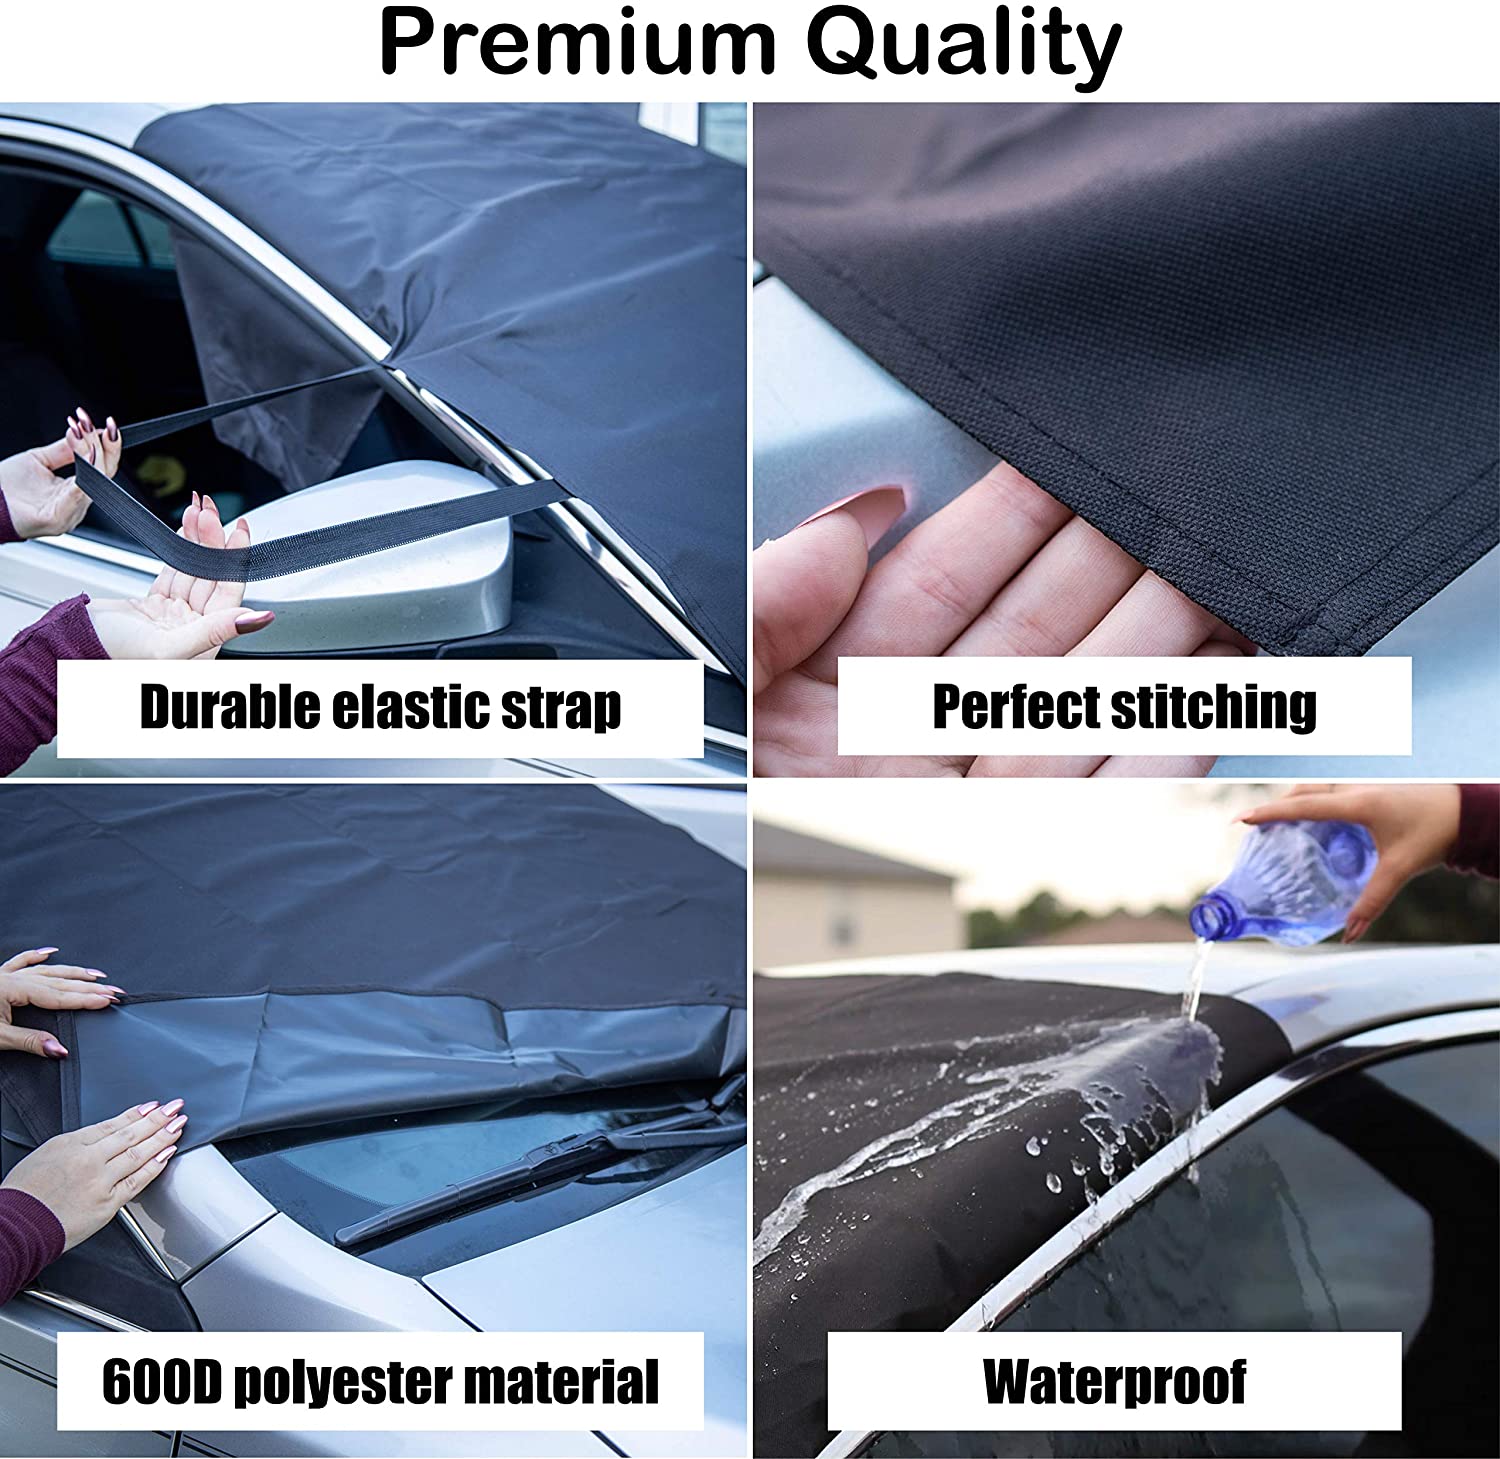 EcoNour Car Windshield Cover for Ice and Snow (69" x 42")| Exterior Automotive Water, Heat & Sag-Proof Snow Cover - image 5 of 8